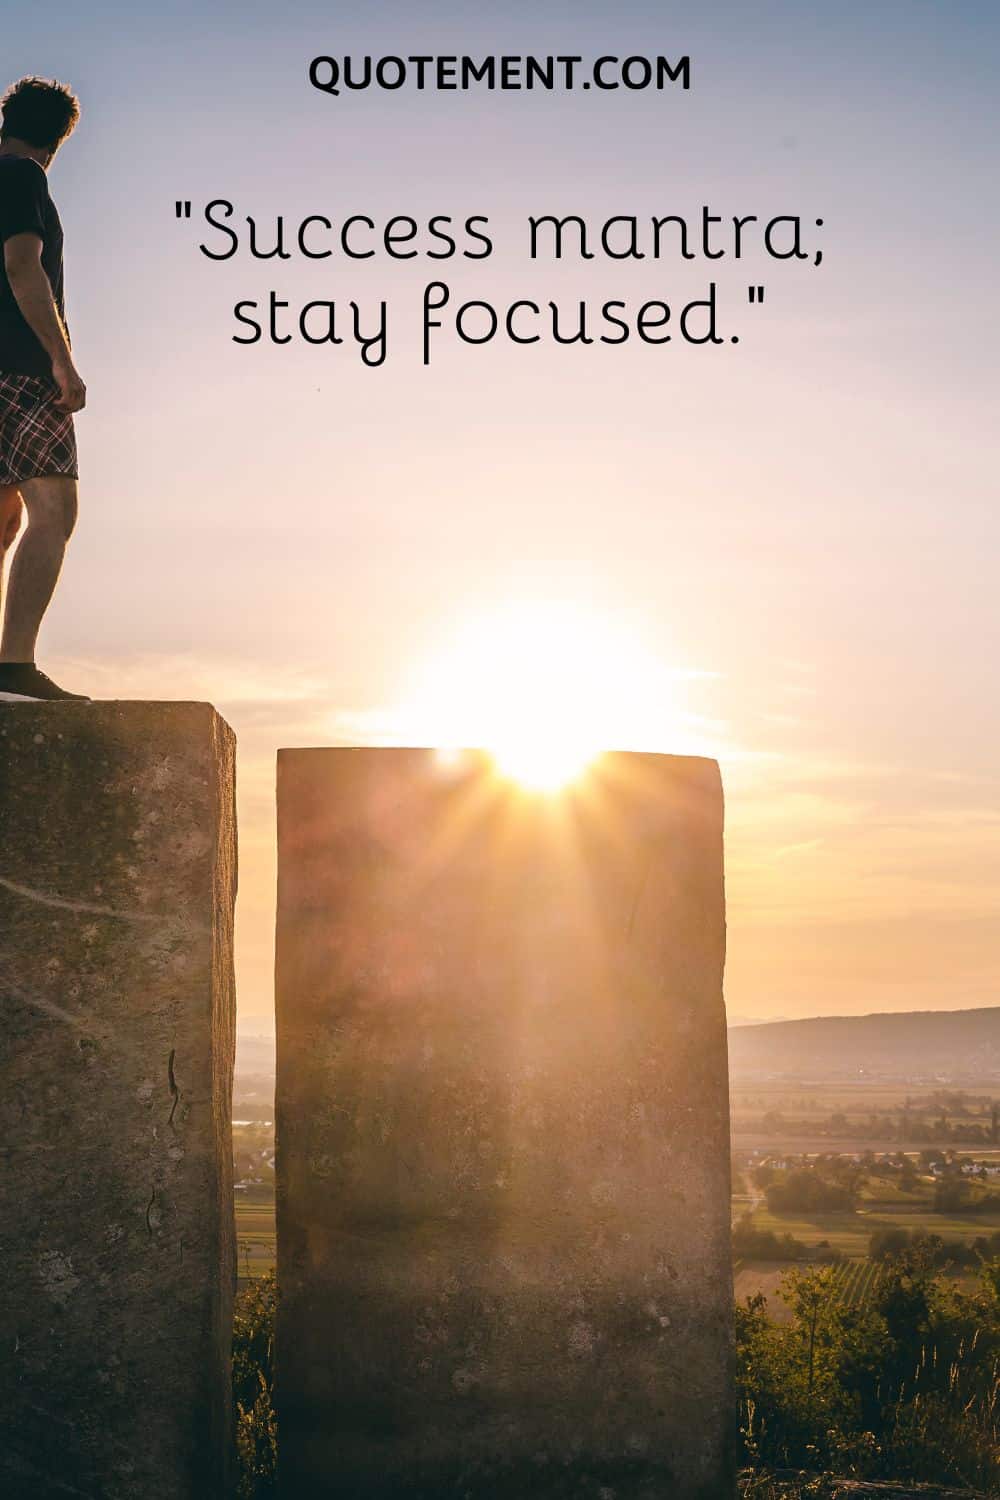 Success mantra; stay focused.